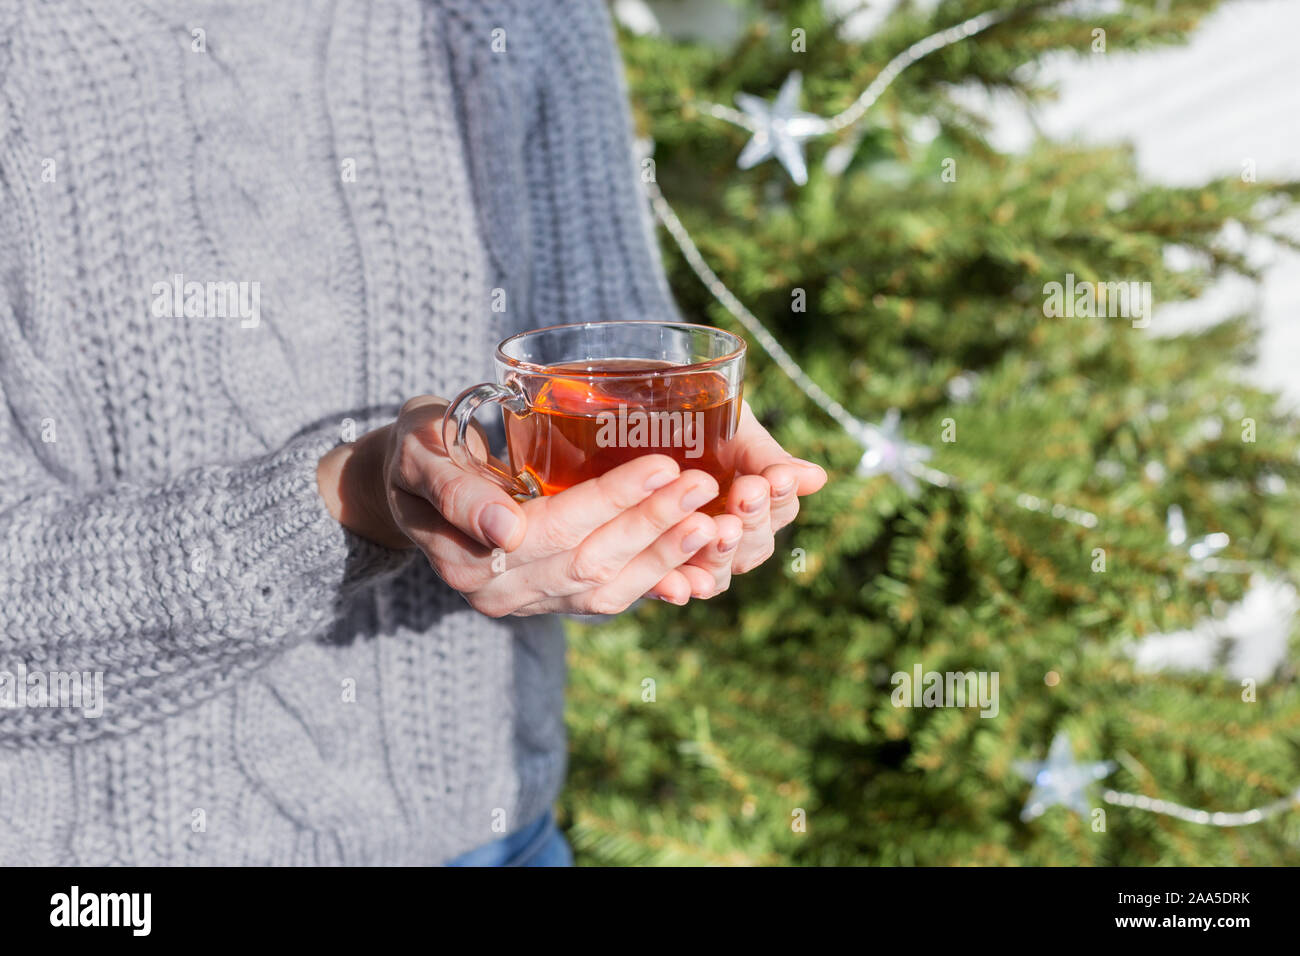 Close up hands with hot drink. Concept of warm cozy lifestyle at sunny day Stock Photo